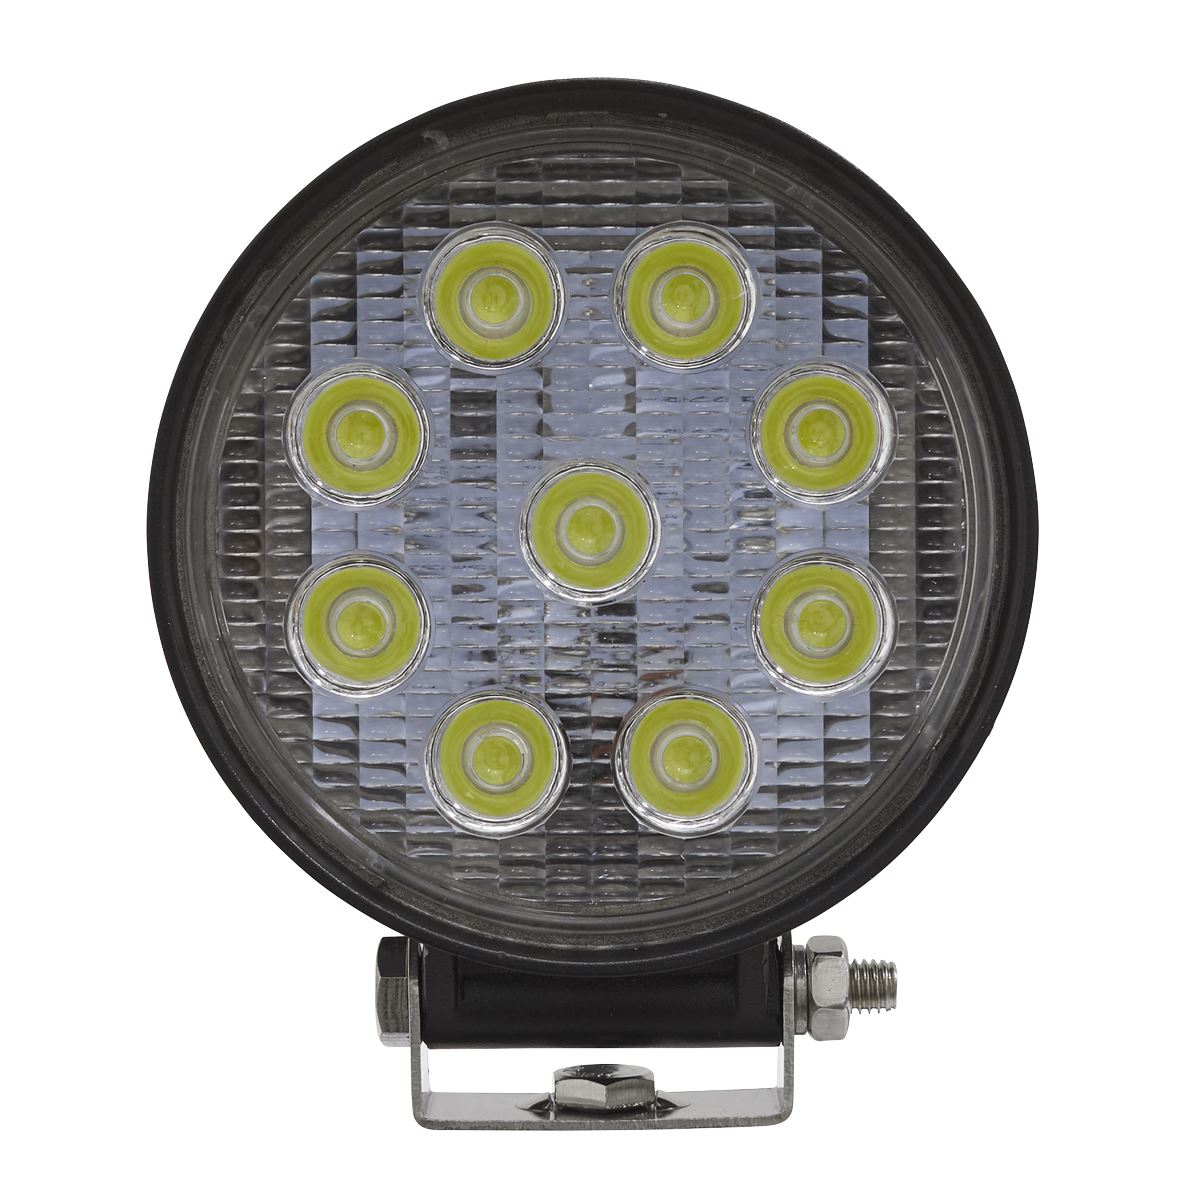 Sealey Round Worklight with Mounting Bracket 27W SMD LED